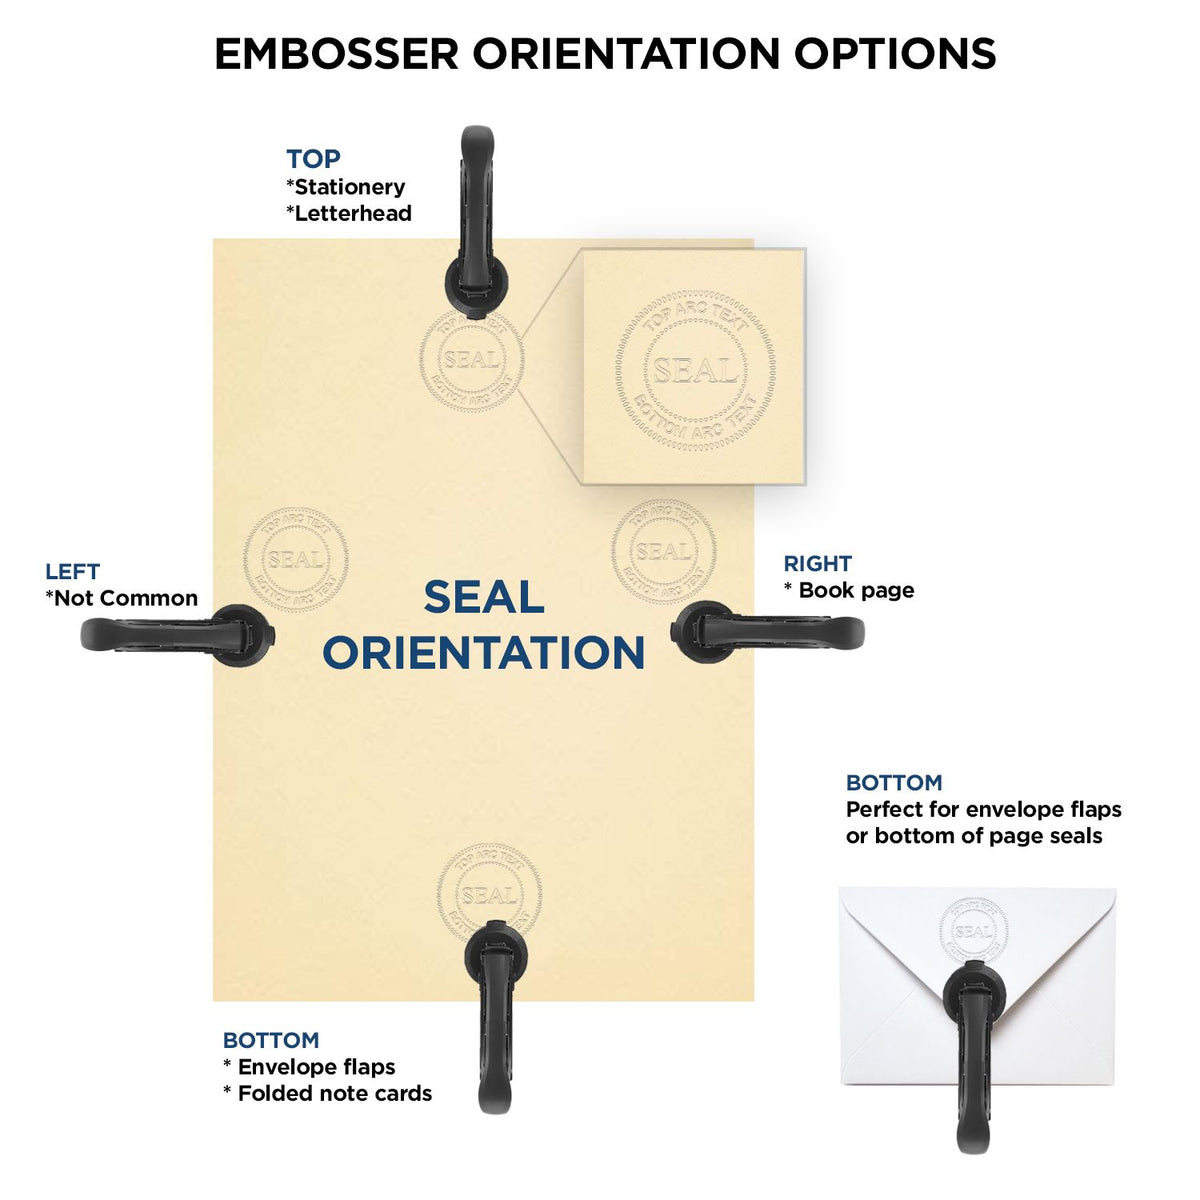 An infographic for the State of South Dakota Extended Long Reach Engineer Seal showing embosser orientation, this is showing examples of a top, bottom, right and left insert.